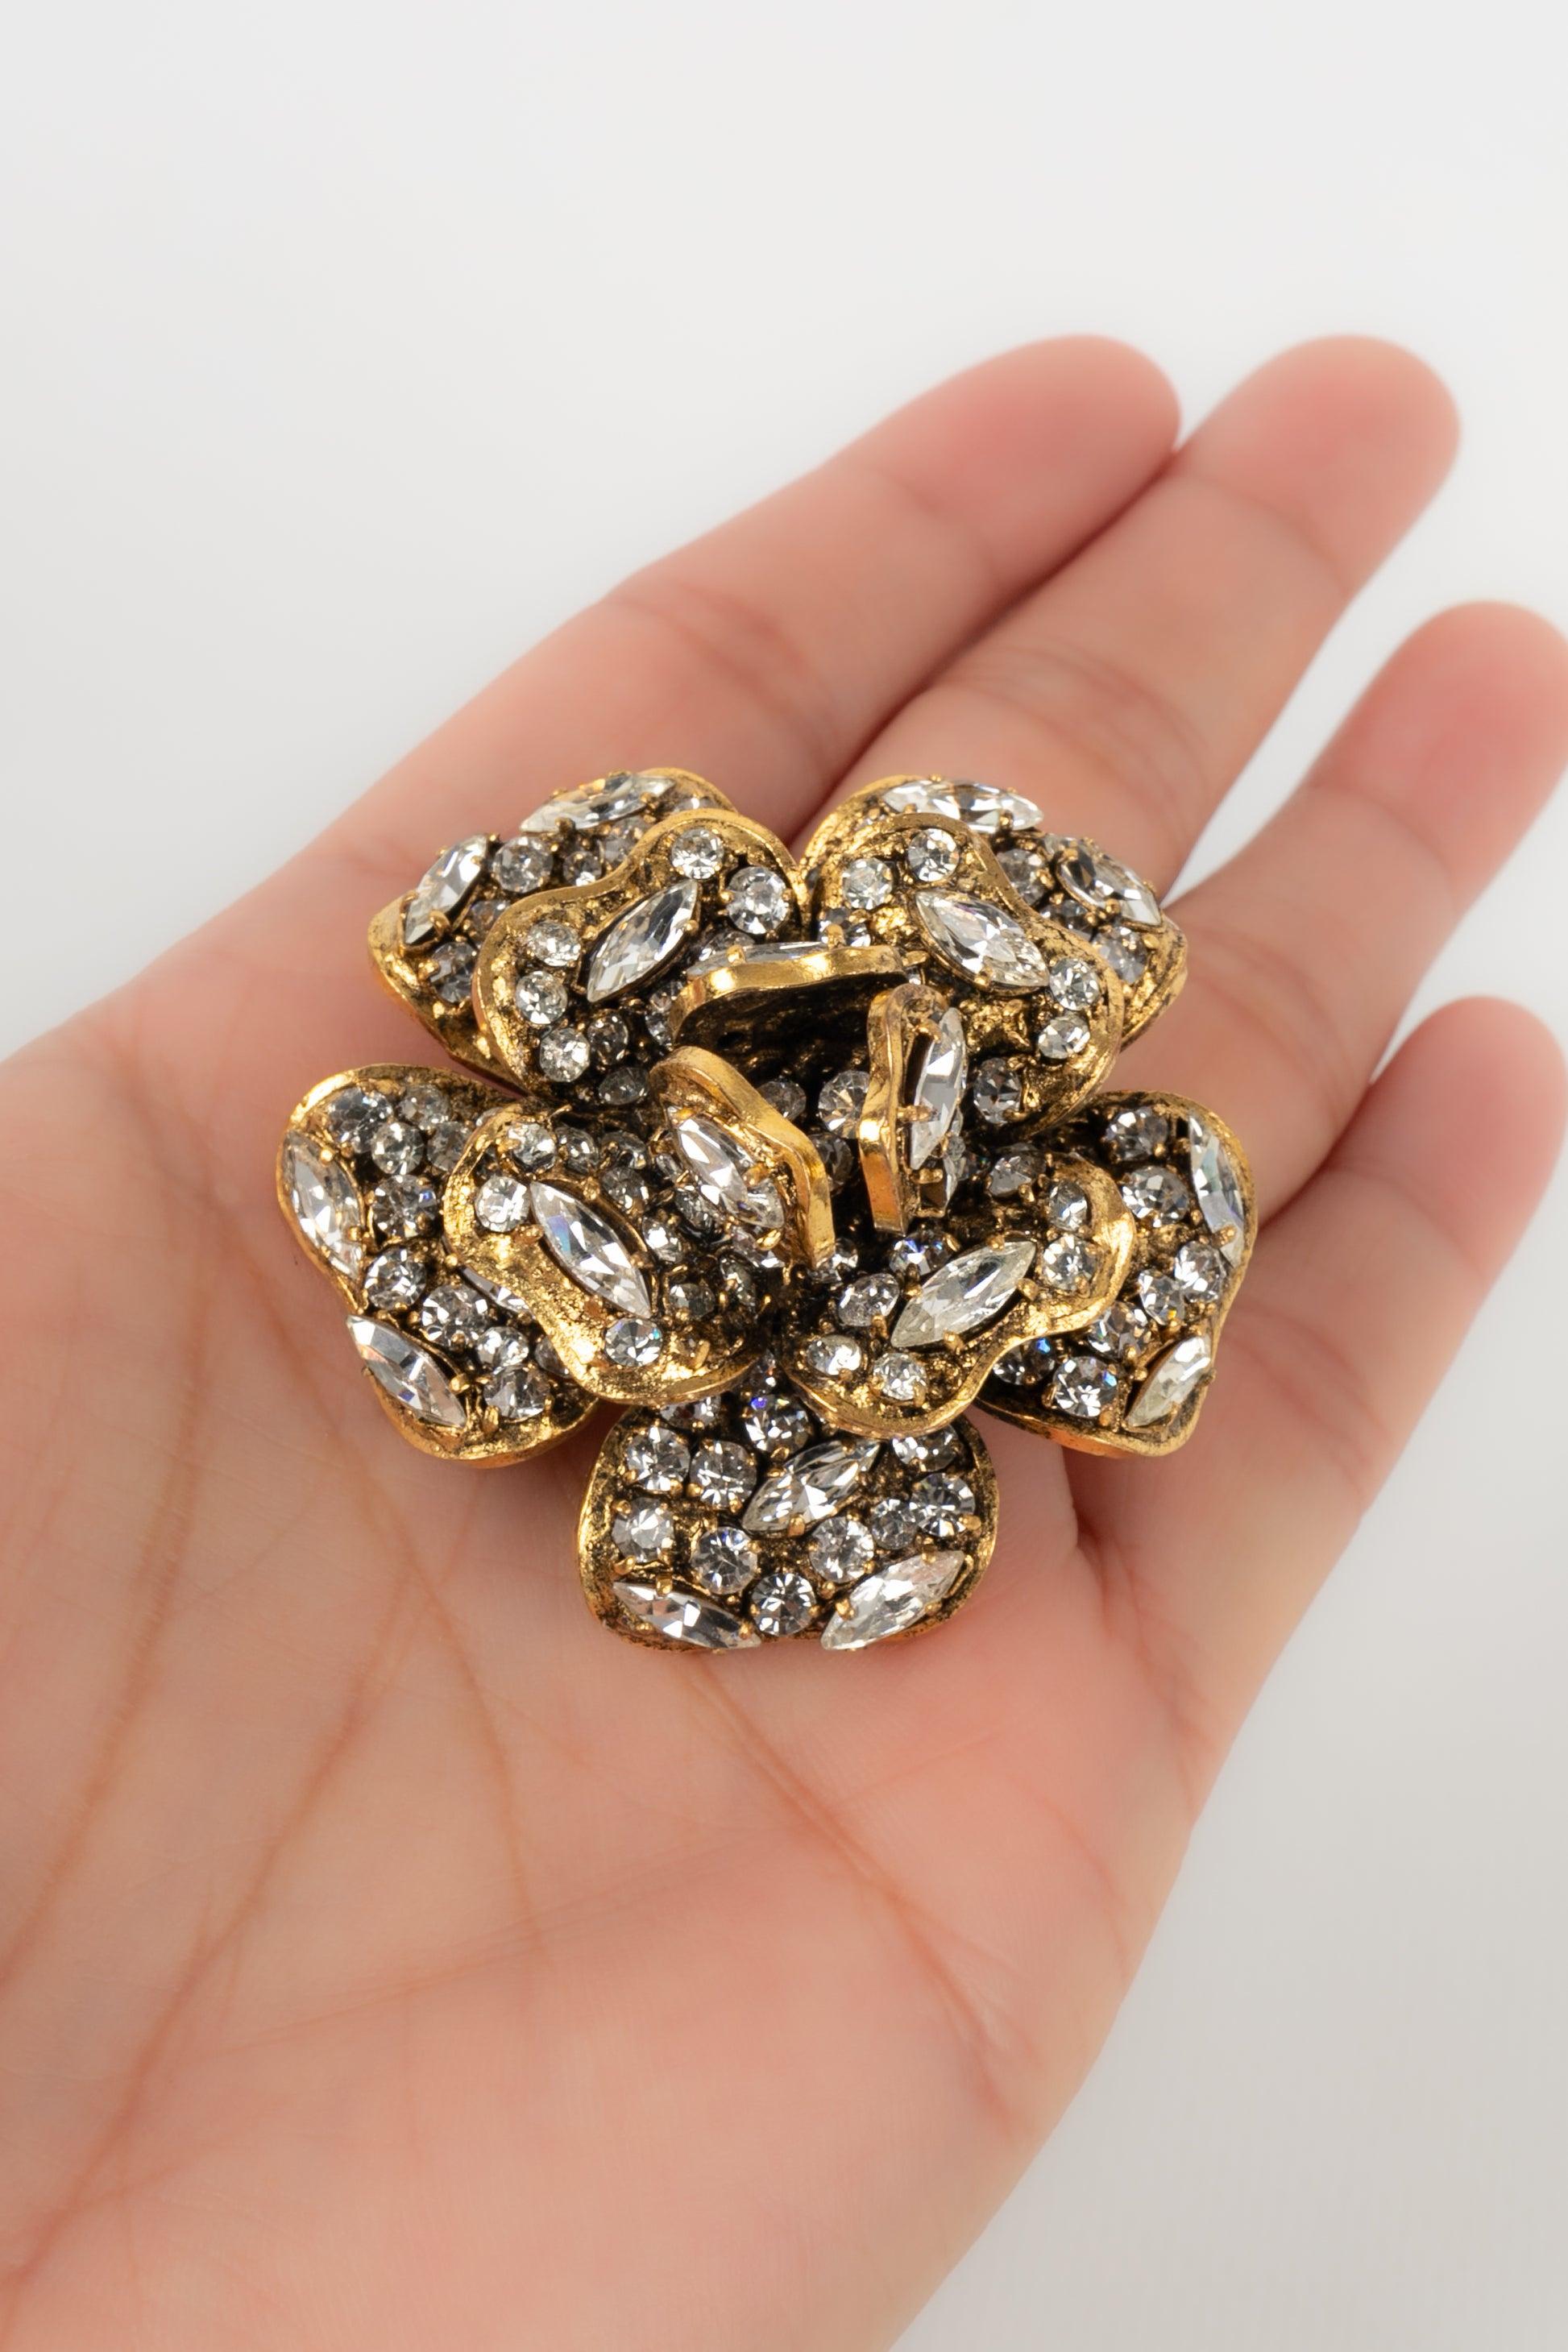 Chanel - (Made in France) Golden metal brooch ornamented with rhinestones.

Additional information:
Condition: Very good condition
Dimensions: Height: 4.5 cm

Seller Reference: BRB45
